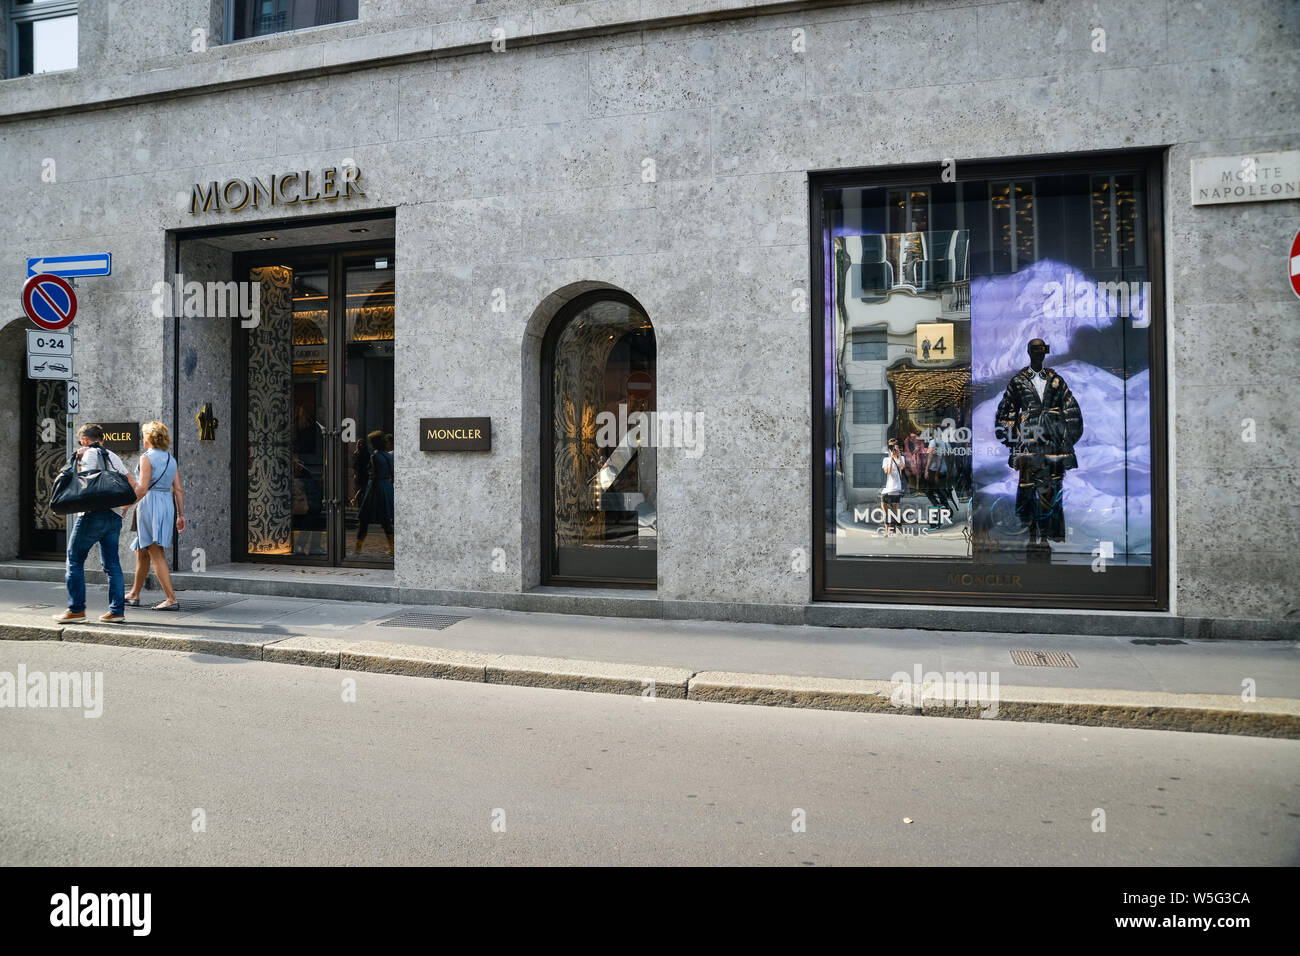 Moncler Shop Window High Resolution Stock Photography and Images - Alamy